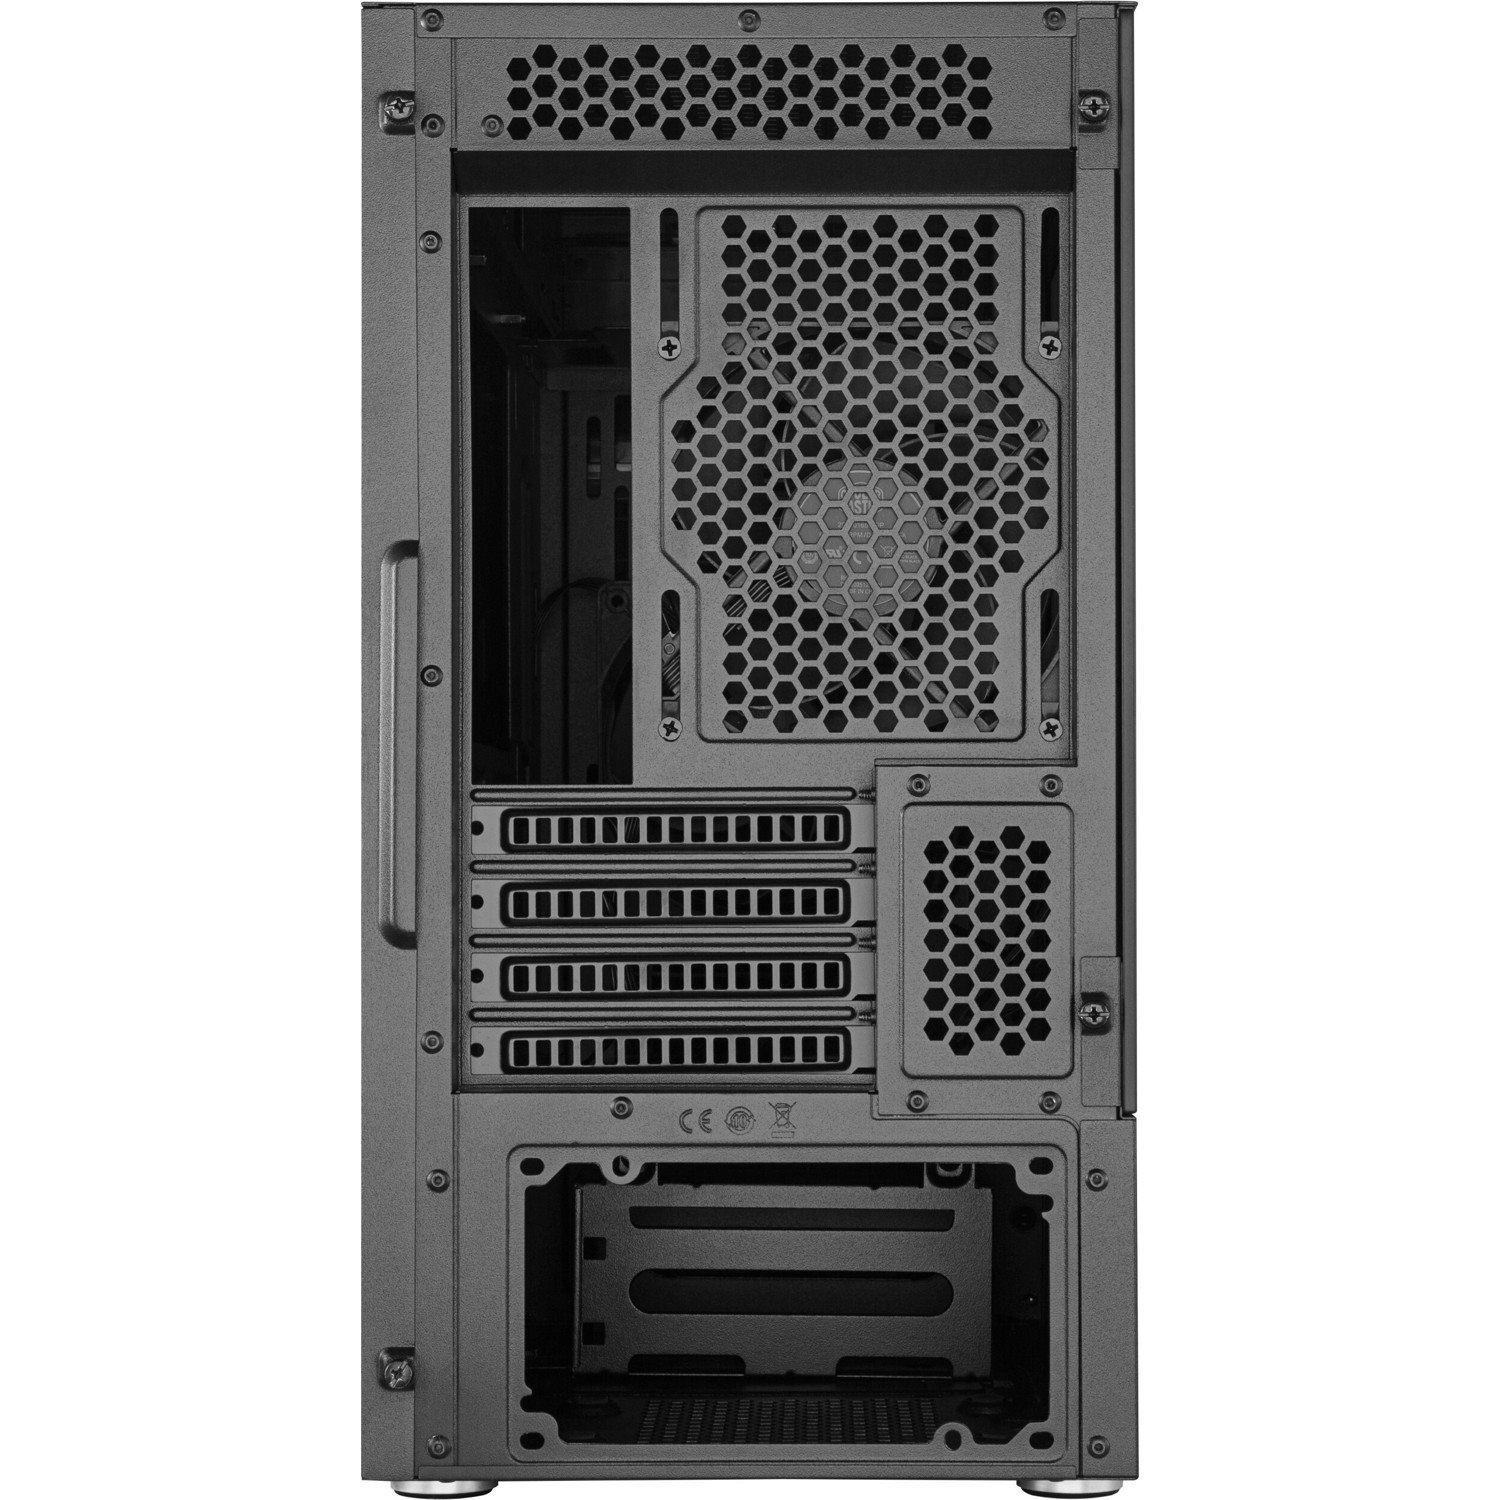 Cooler Master Silencio MCS-S400-KG5N-S00 Computer Case - Mini ITX, Micro ATX Motherboard Supported - Mini-tower - Steel, Plastic, Tempered Glass - Black